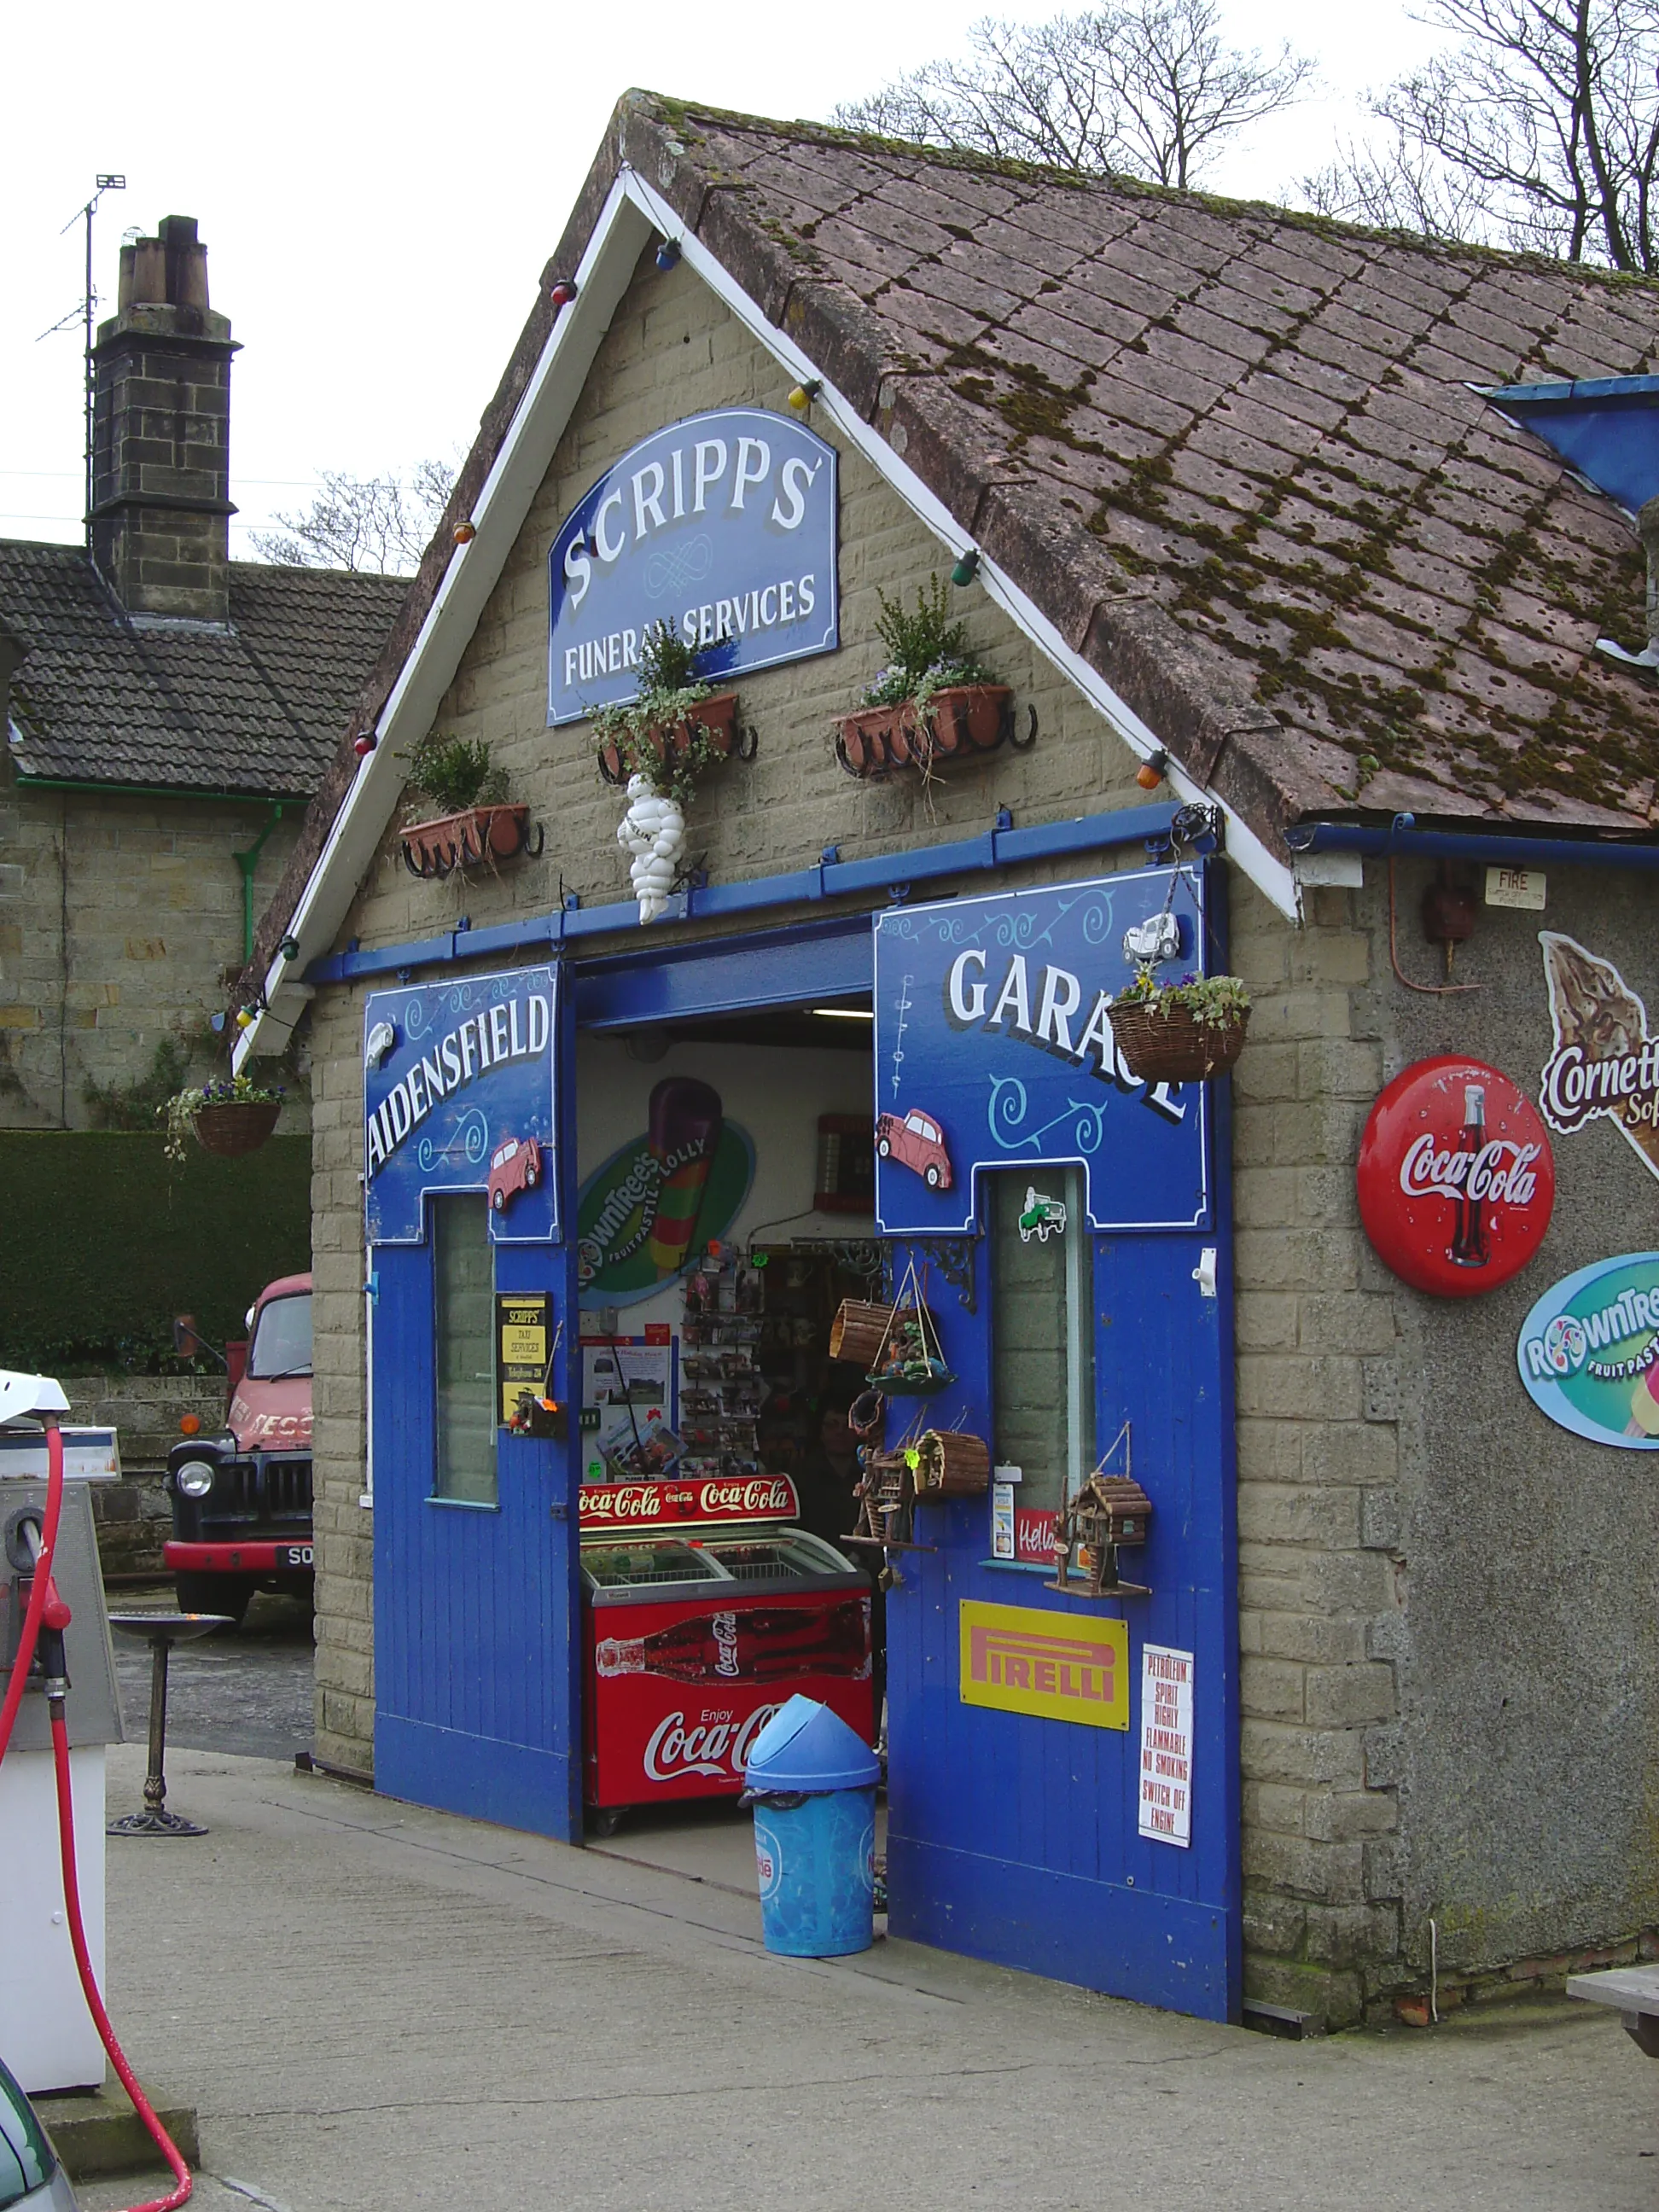 Photo showing: Scripp's Funeral Services and Petrol Station, Goathland, North Yorkshire.